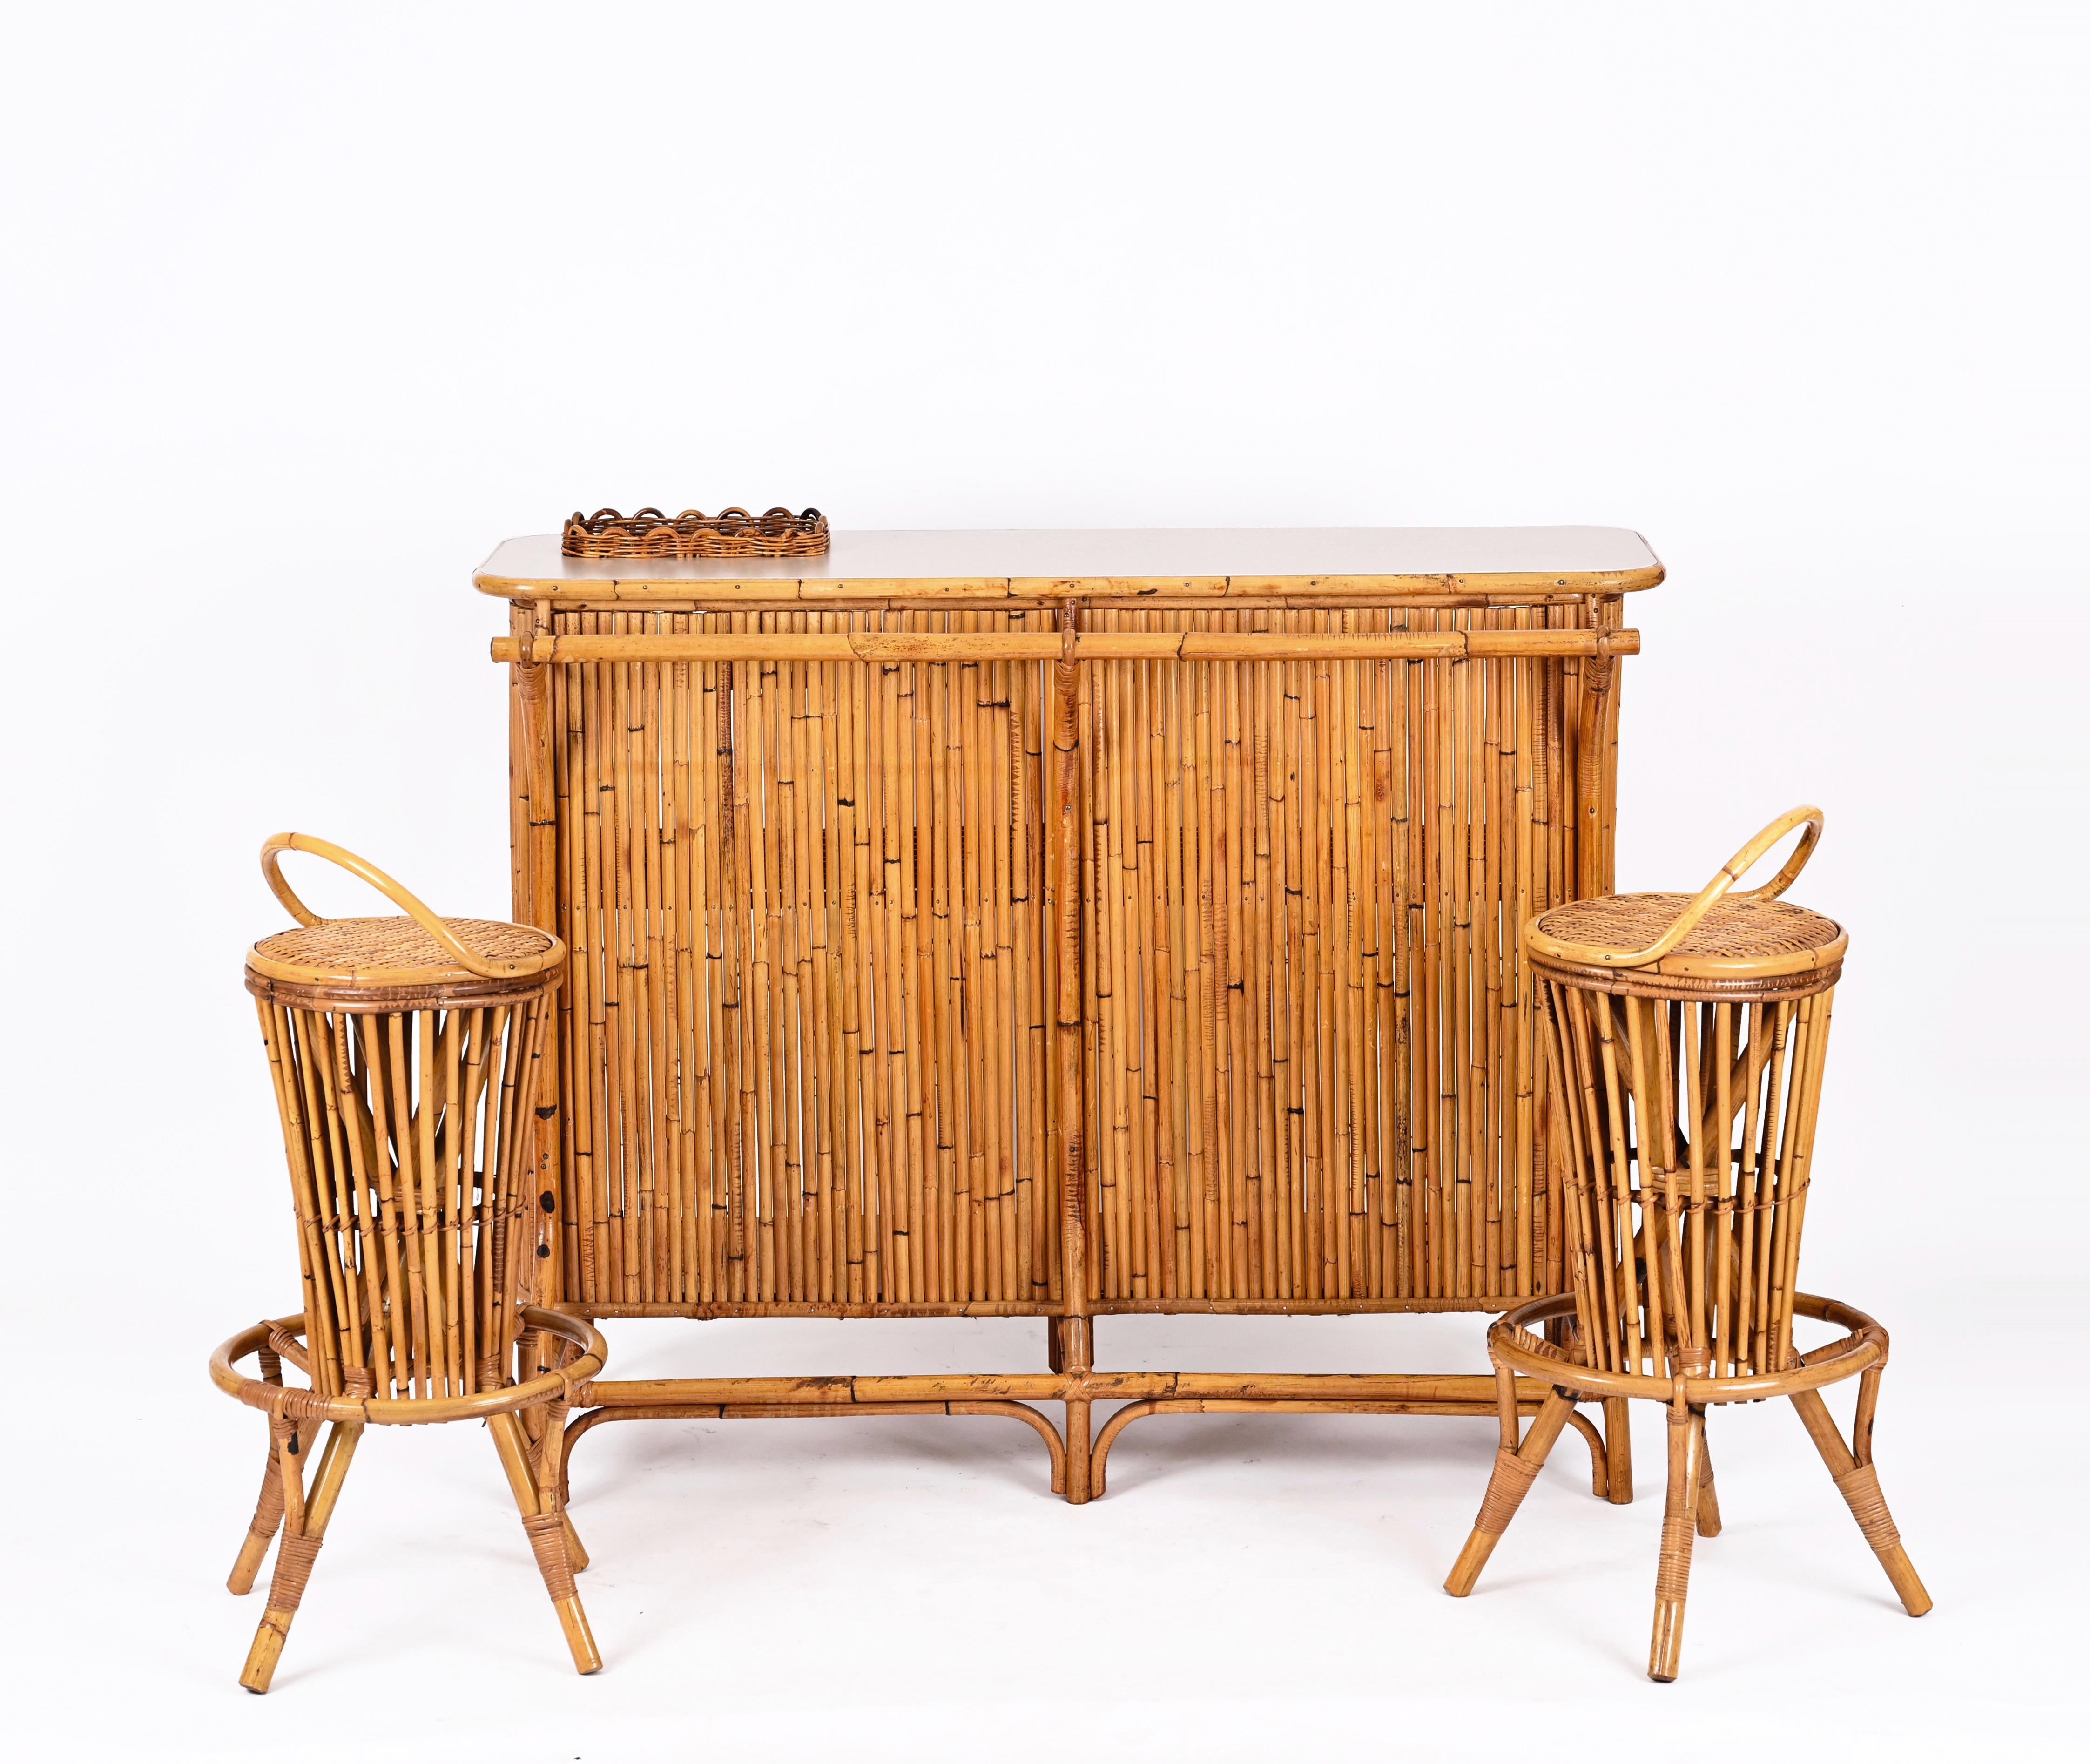 Dry Bar with Two Stools in Rattan, Bamboo and Wicker by Tito Agnoli, Italy 1950s For Sale 3